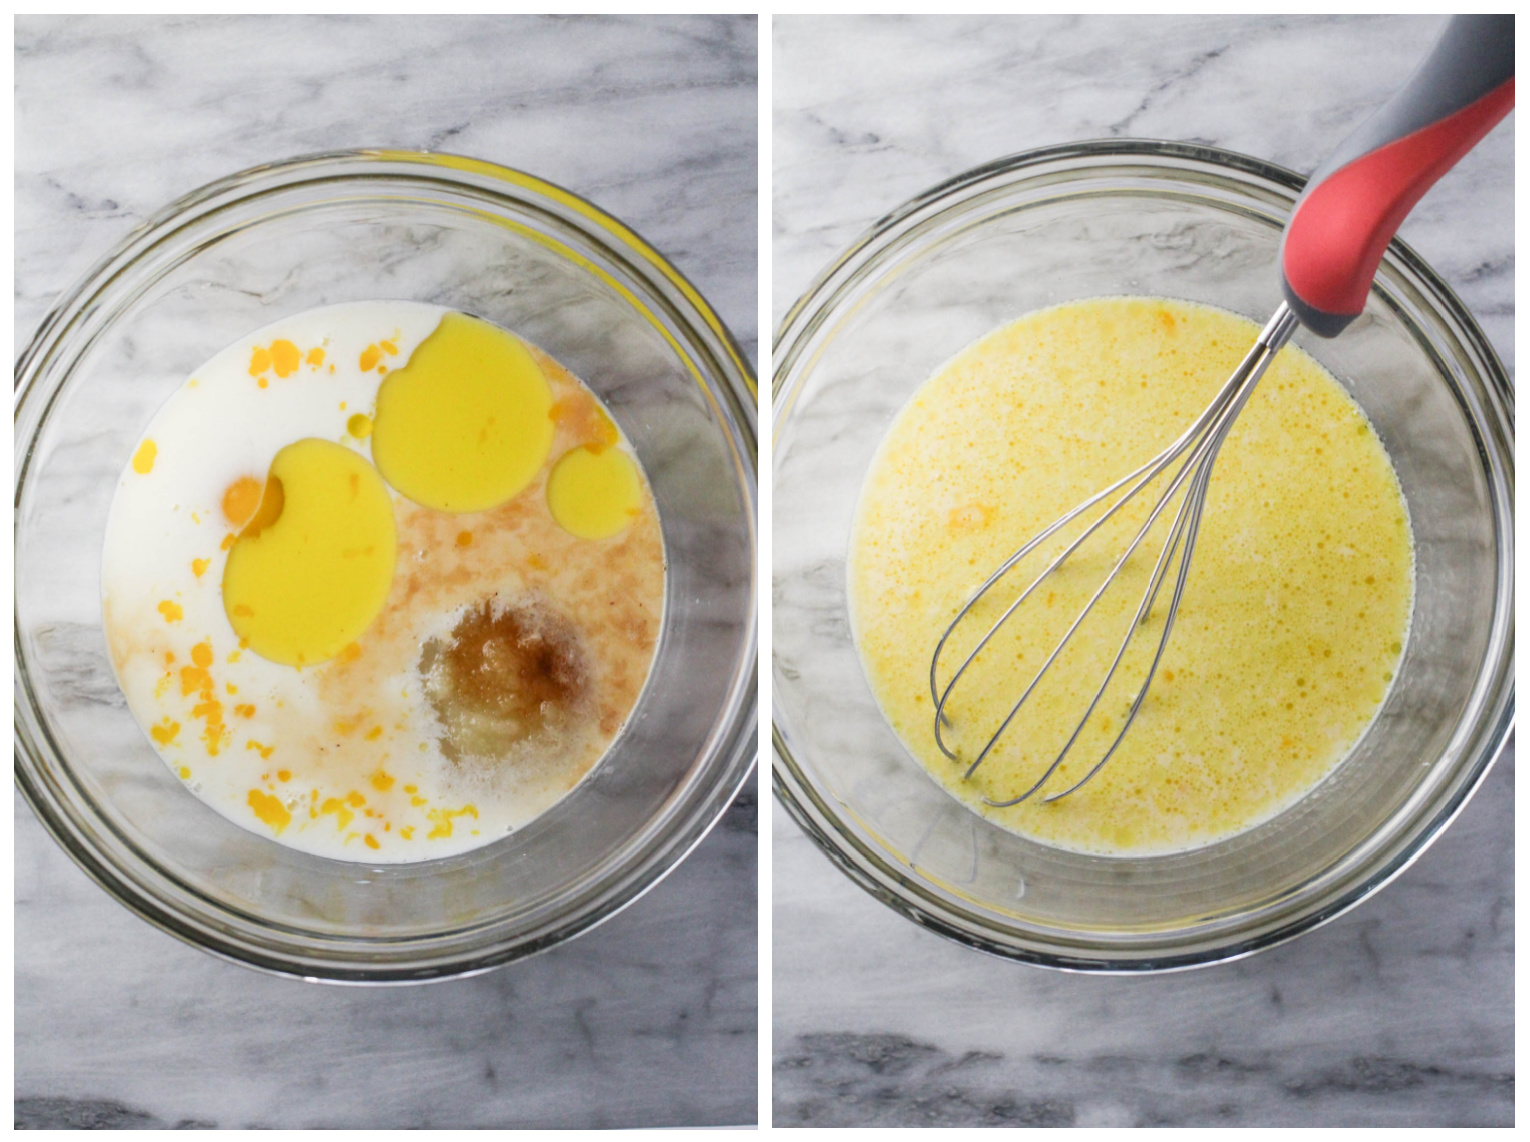 Two side by side pictures of the wet ingredients in a glass bowl. In the picture on the right, the ingredients are mixed with a whisk.